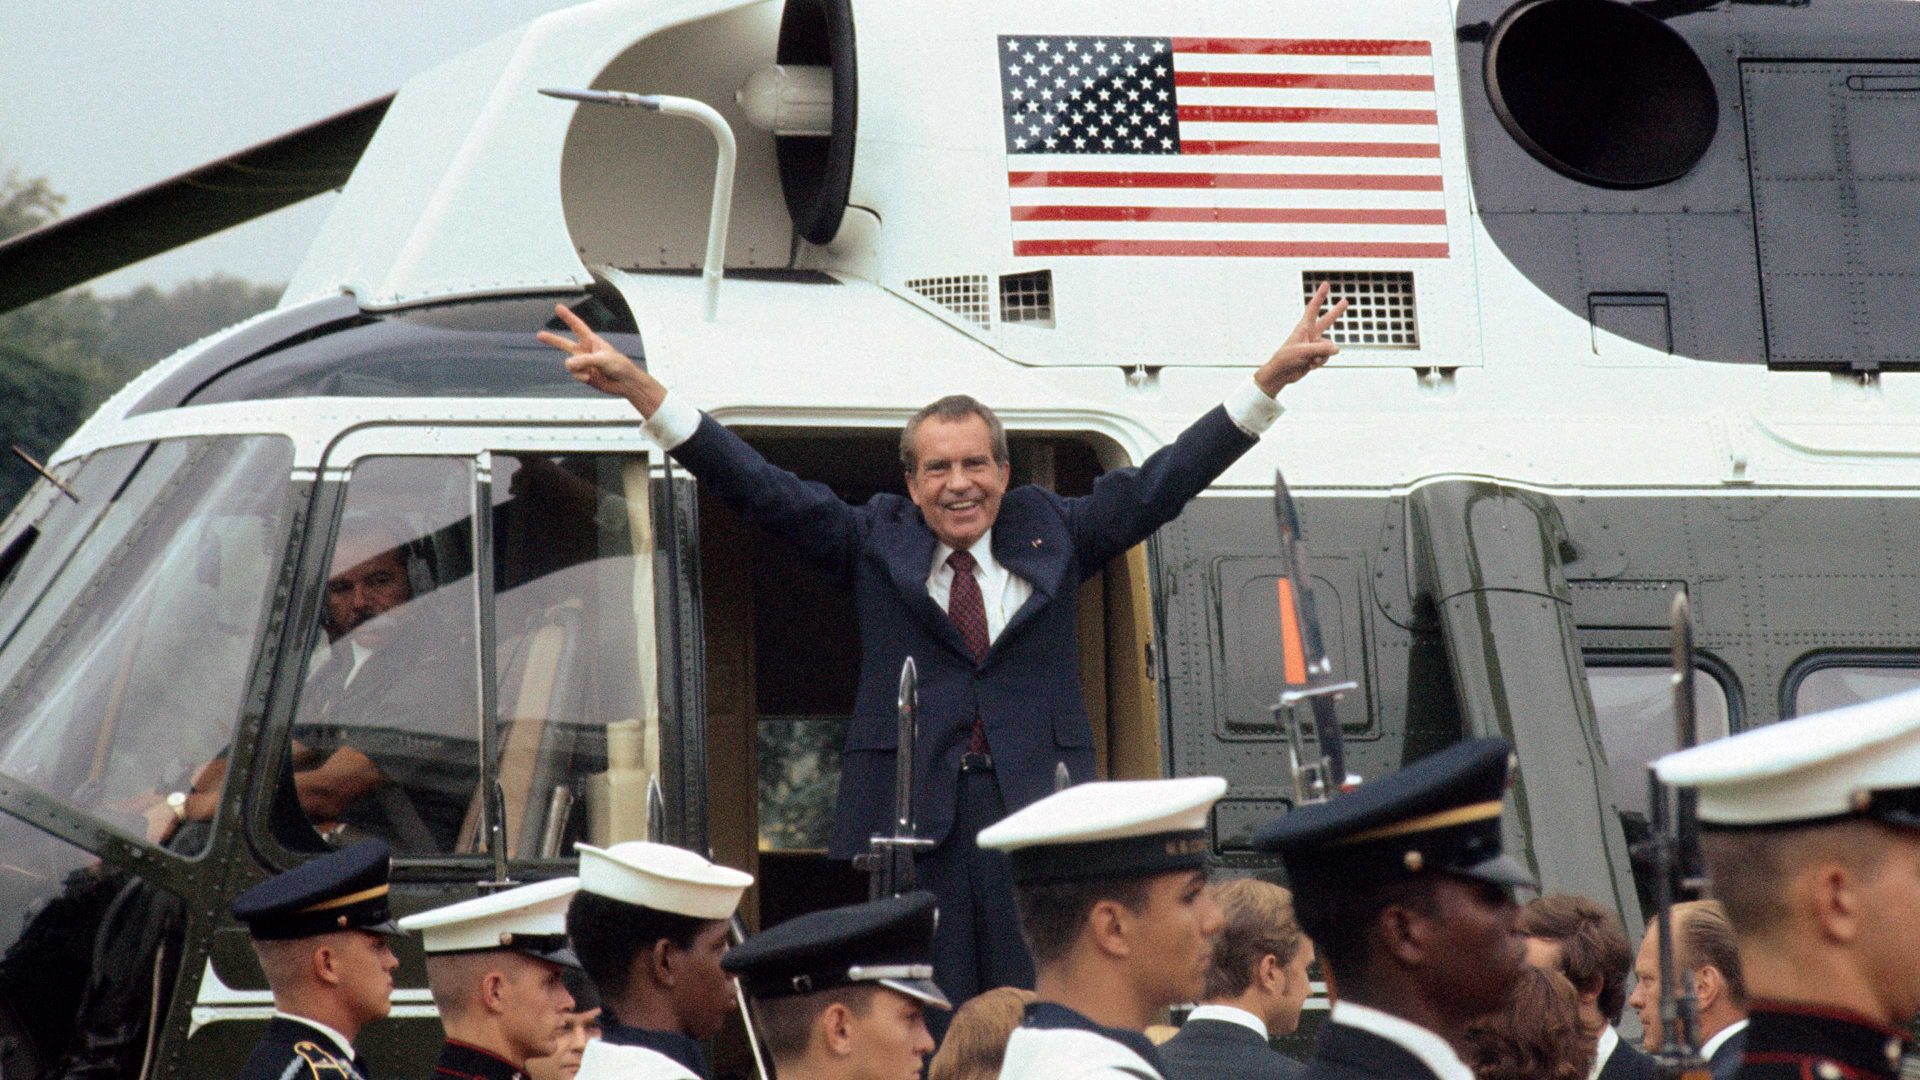 Richard Nixon boards the White House helicopter after resigning the US presidency 
in August 1974. Photo: Bettmann/Getty